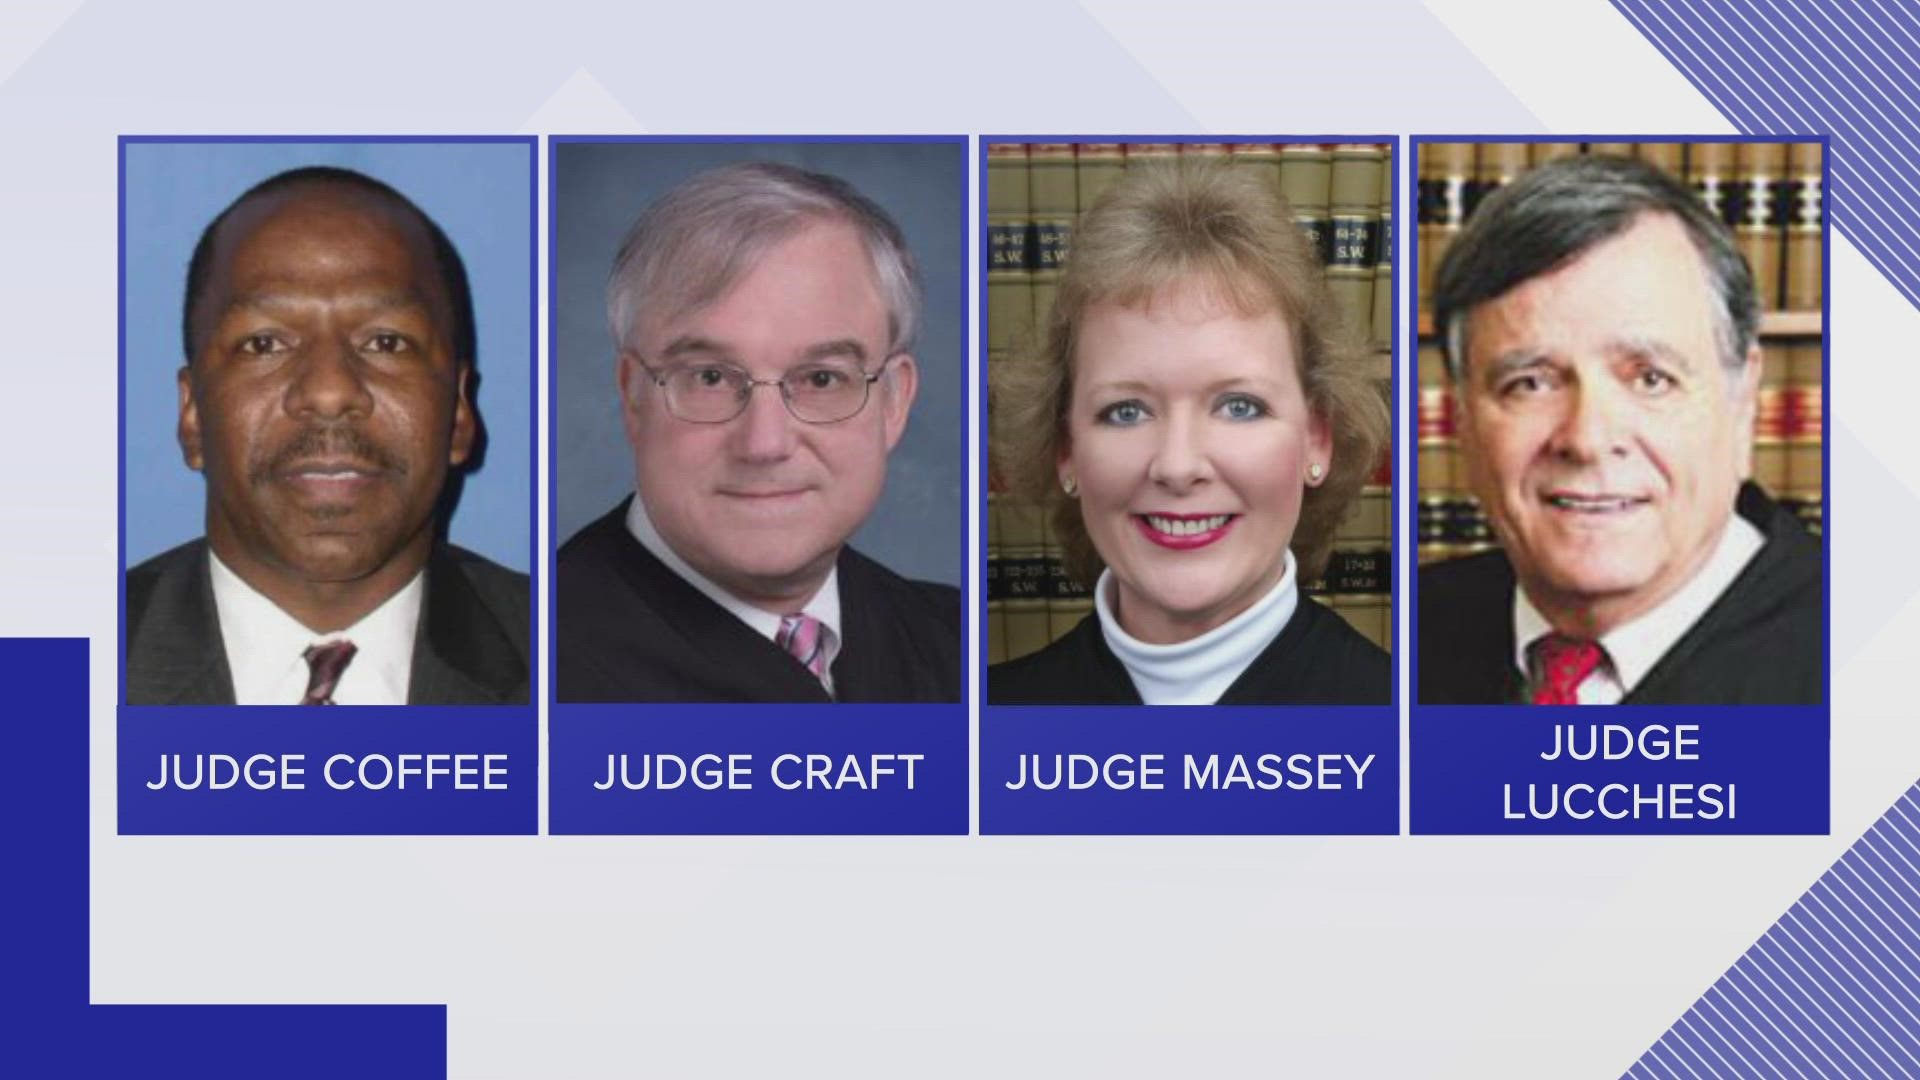 Just City releases data of Shelby County criminal court judges on